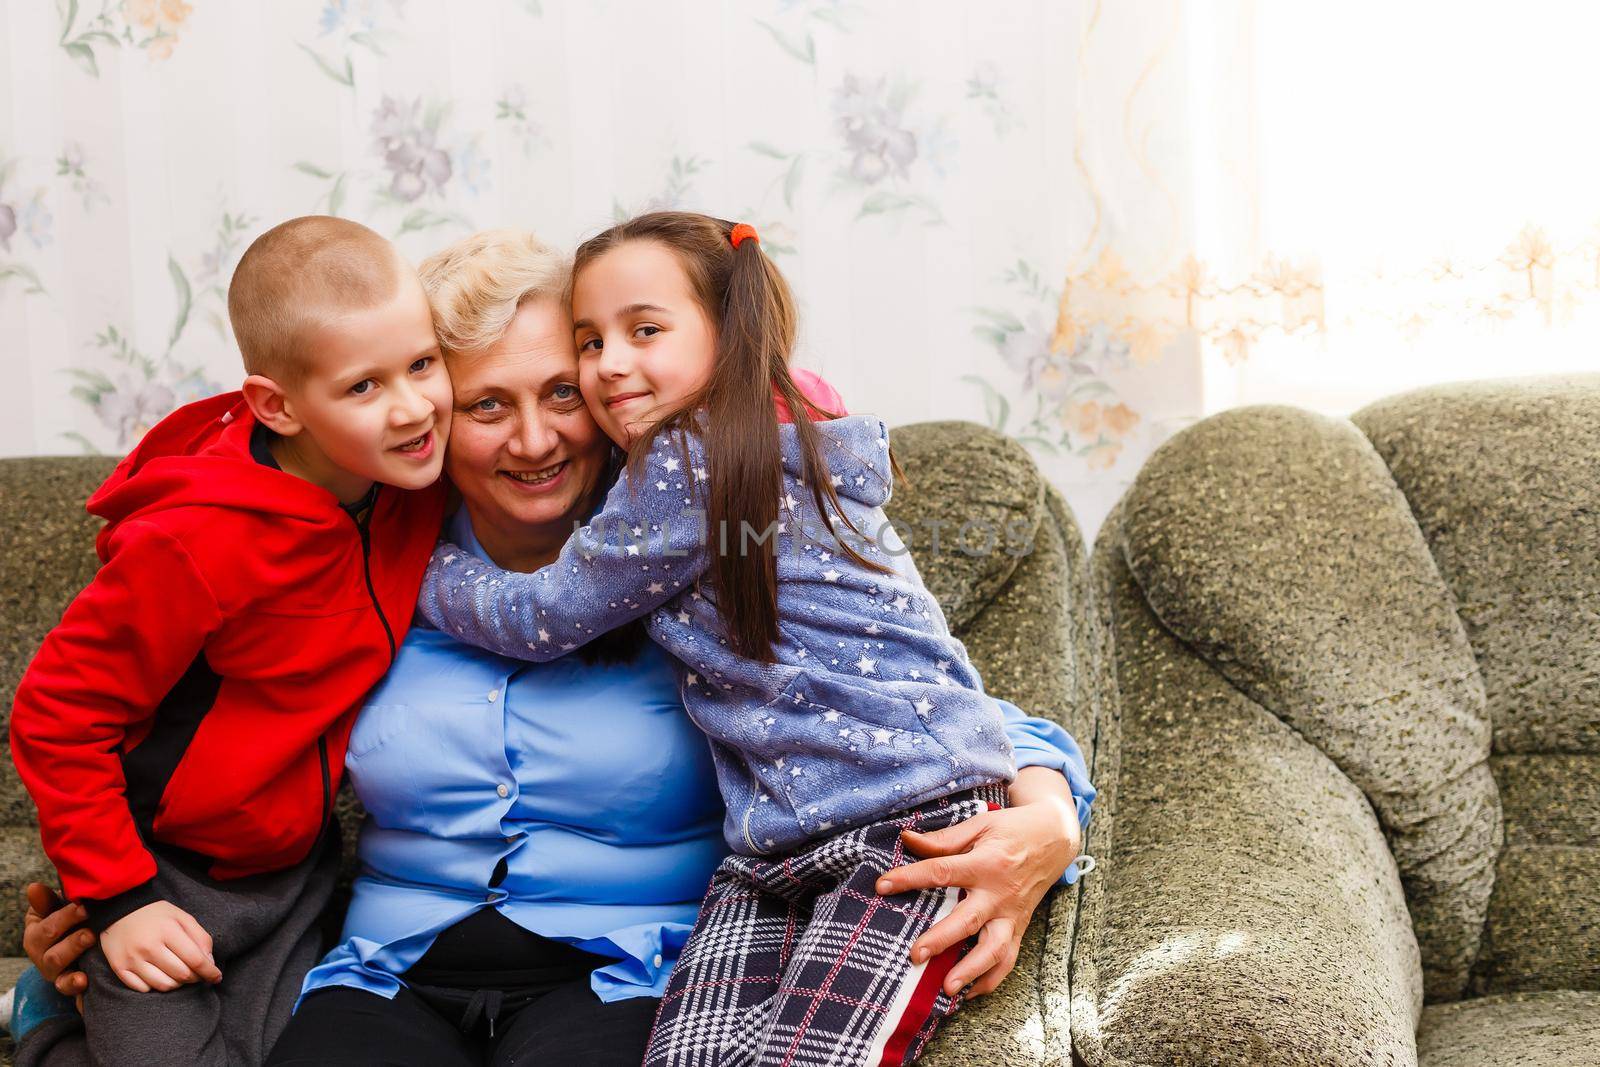 Grown up adult smiling grandchildren embraces elderly grandmother glad to see missing her, visit of loving relatives enjoy communication, cuddle as symbol of connection, love and support concept by Andelov13